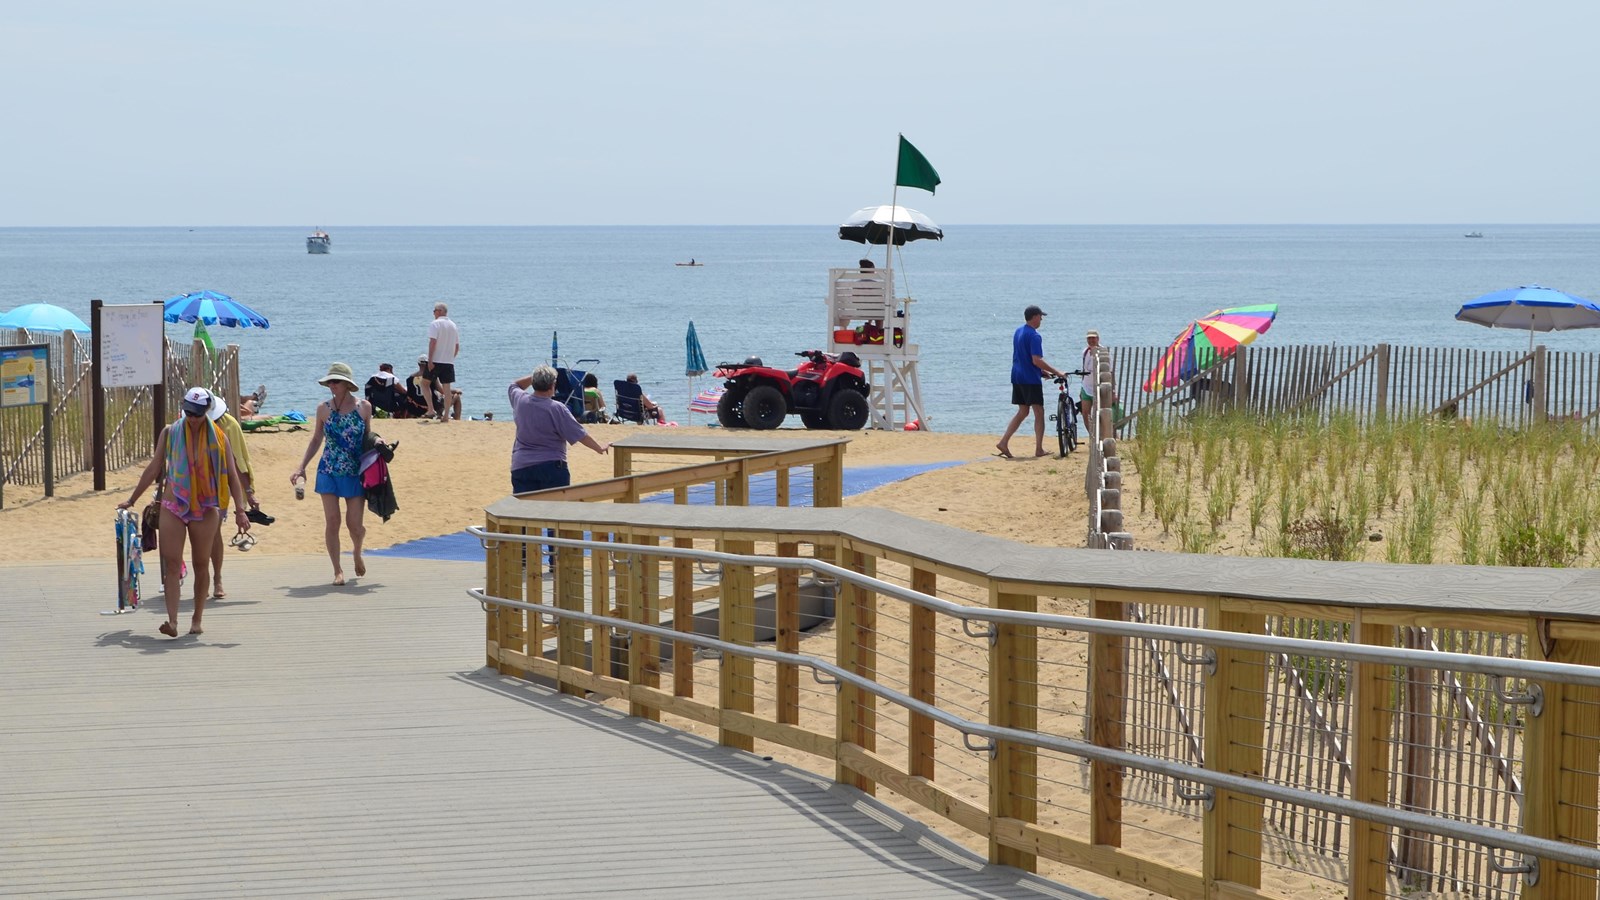 People walk on a wide walkway with handrail leads down to a sandy beach.